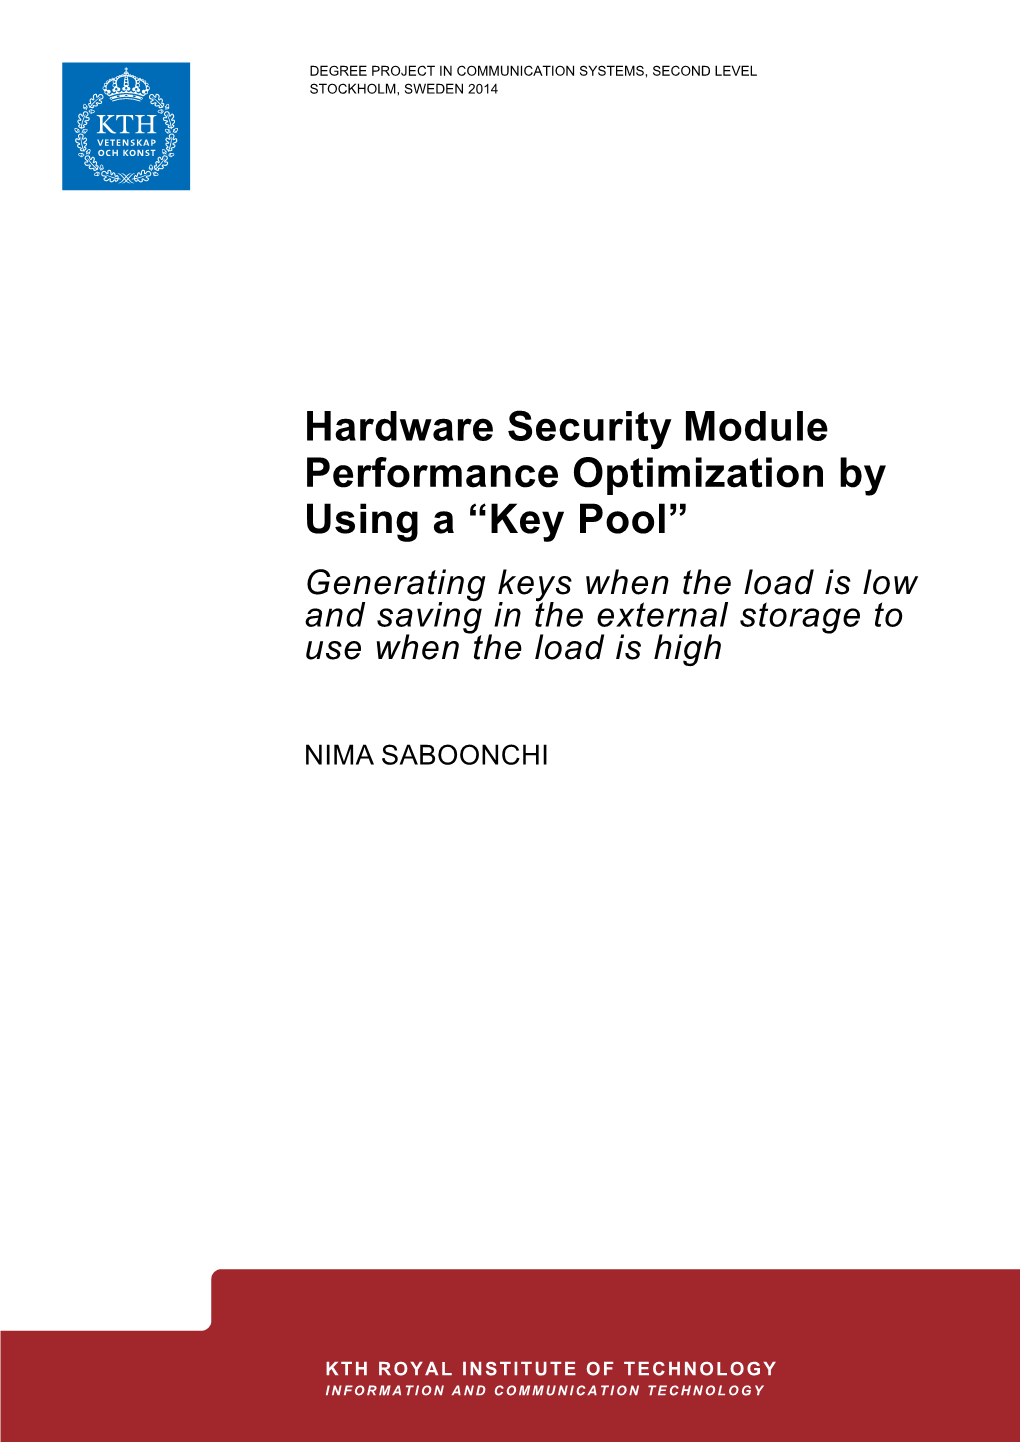 Hardware Security Module Performance Optimization by Using A